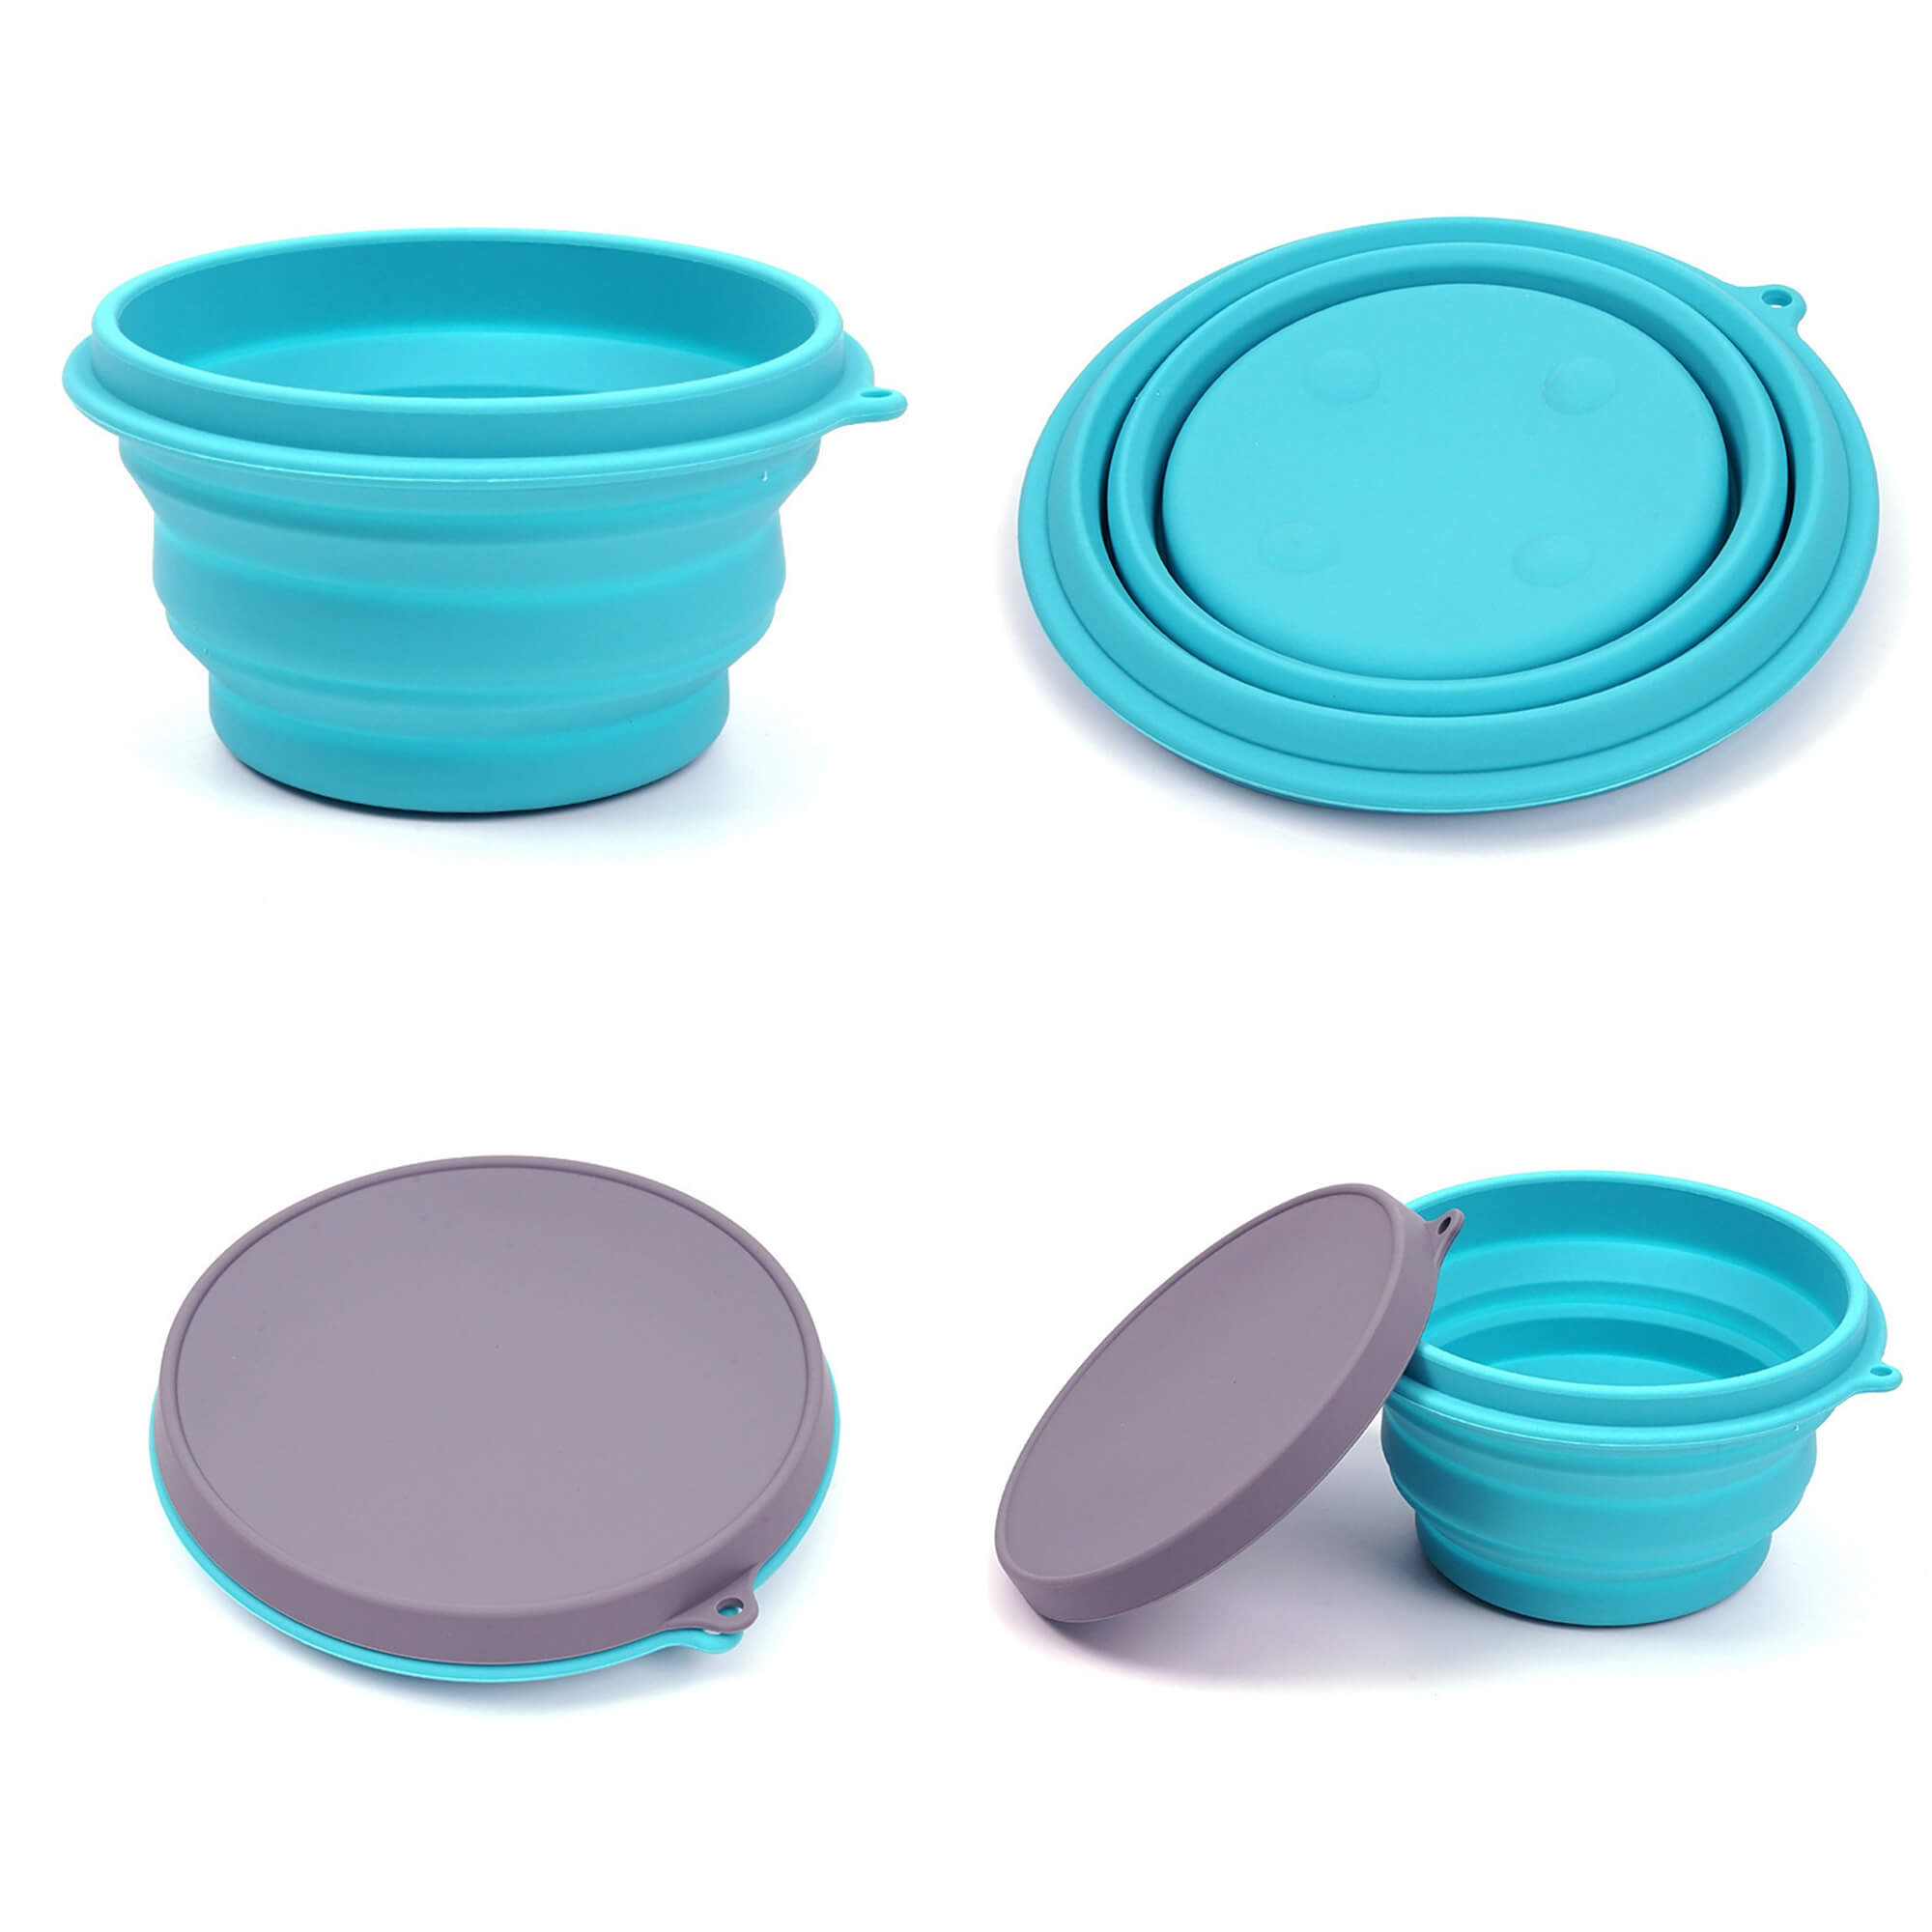 ZERO WASTE COLLAPSIBLE BOWLS